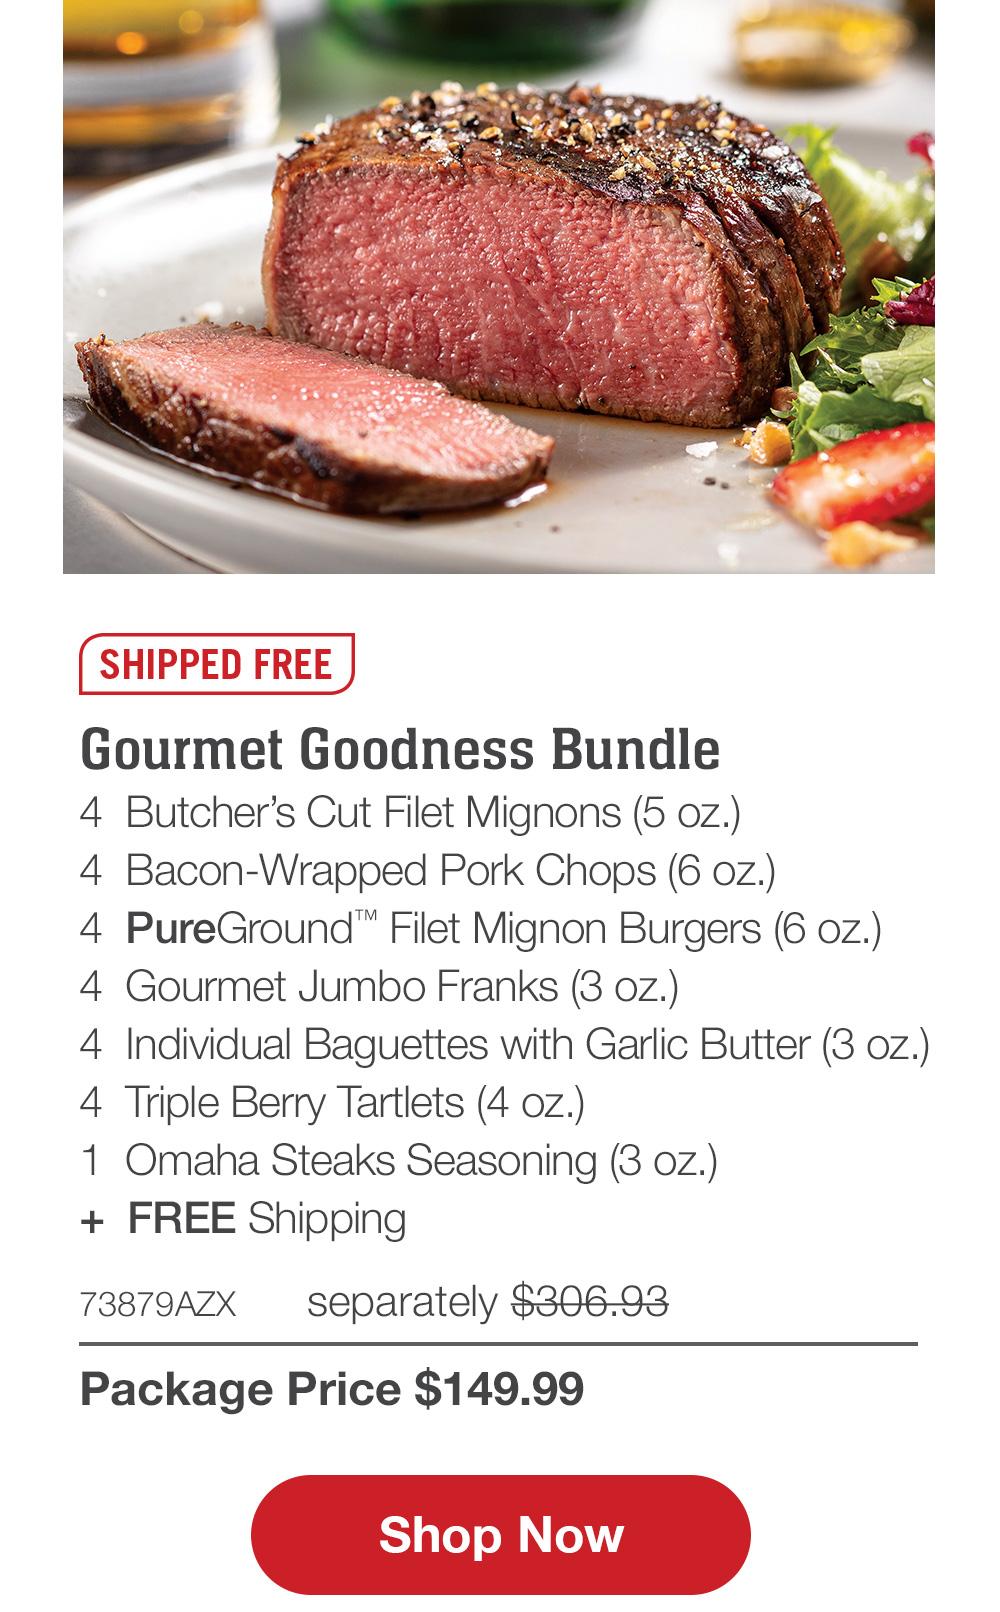 SHIPPED FREE | Gourmet Goodness Bundle - 4 Butcher's Cut Filet Mignons (5 oz.) - 4 Bacon-Wrapped Pork Chops (6 oz.) - 4 PureGround™ Filet Mignon Burgers (6 oz.) - 4 Gourmet Jumbo Franks (3 oz.) - 4 Individual Baguettes with Garlic Butter (3 oz.) - 4 Triple Berry Tartlets (4 oz.) - 1 Omaha Steaks Seasoning (3 oz.) + FREE Shipping - 73879AZX separately $306.93 | Package Price $149.99 || Shop Now